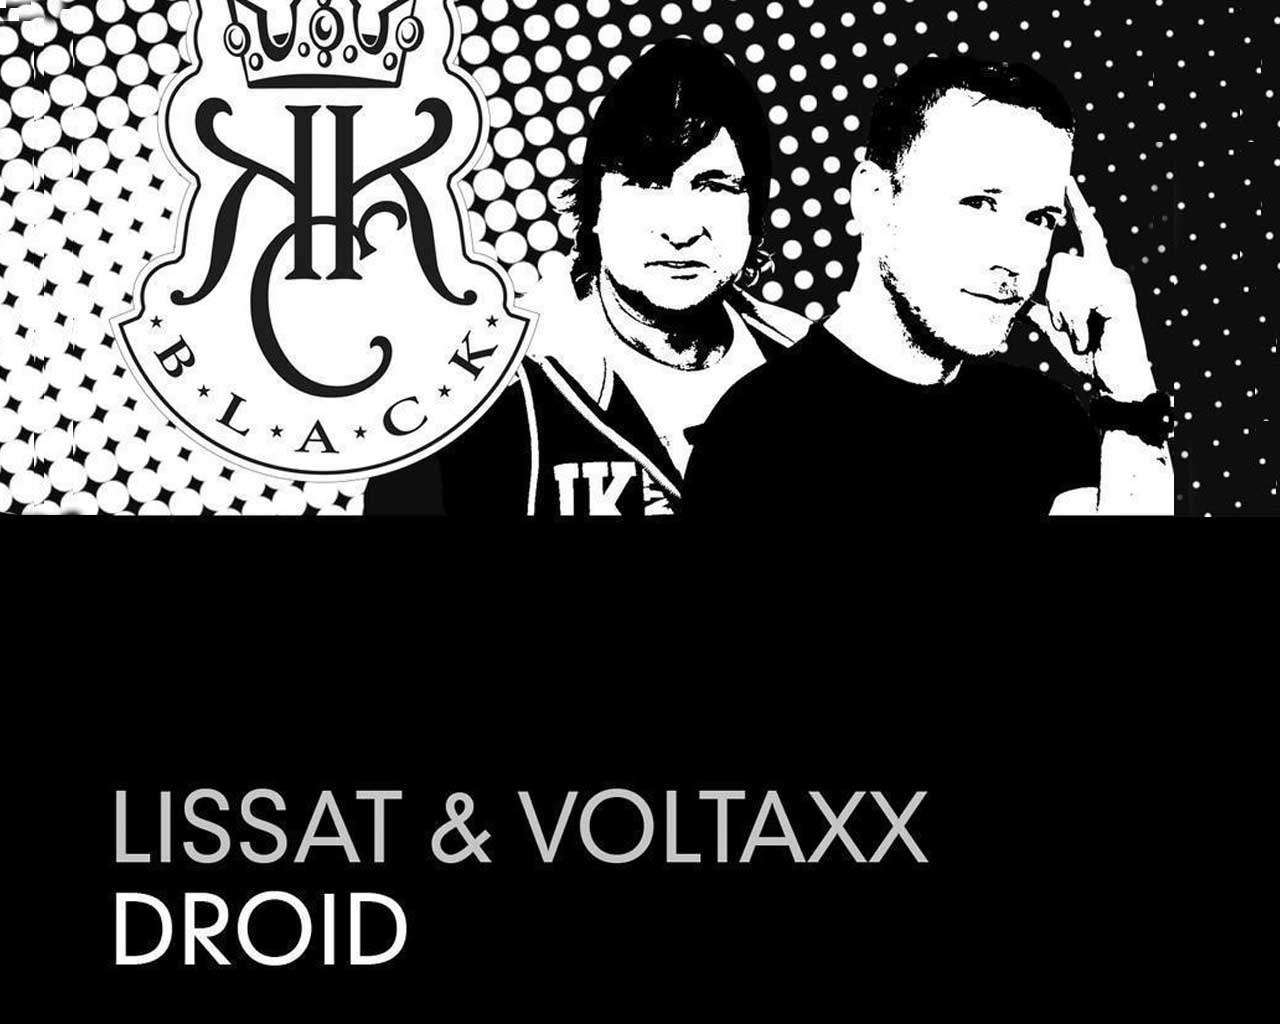 Lissat & Voltaxx HD and Wide Wallpapers